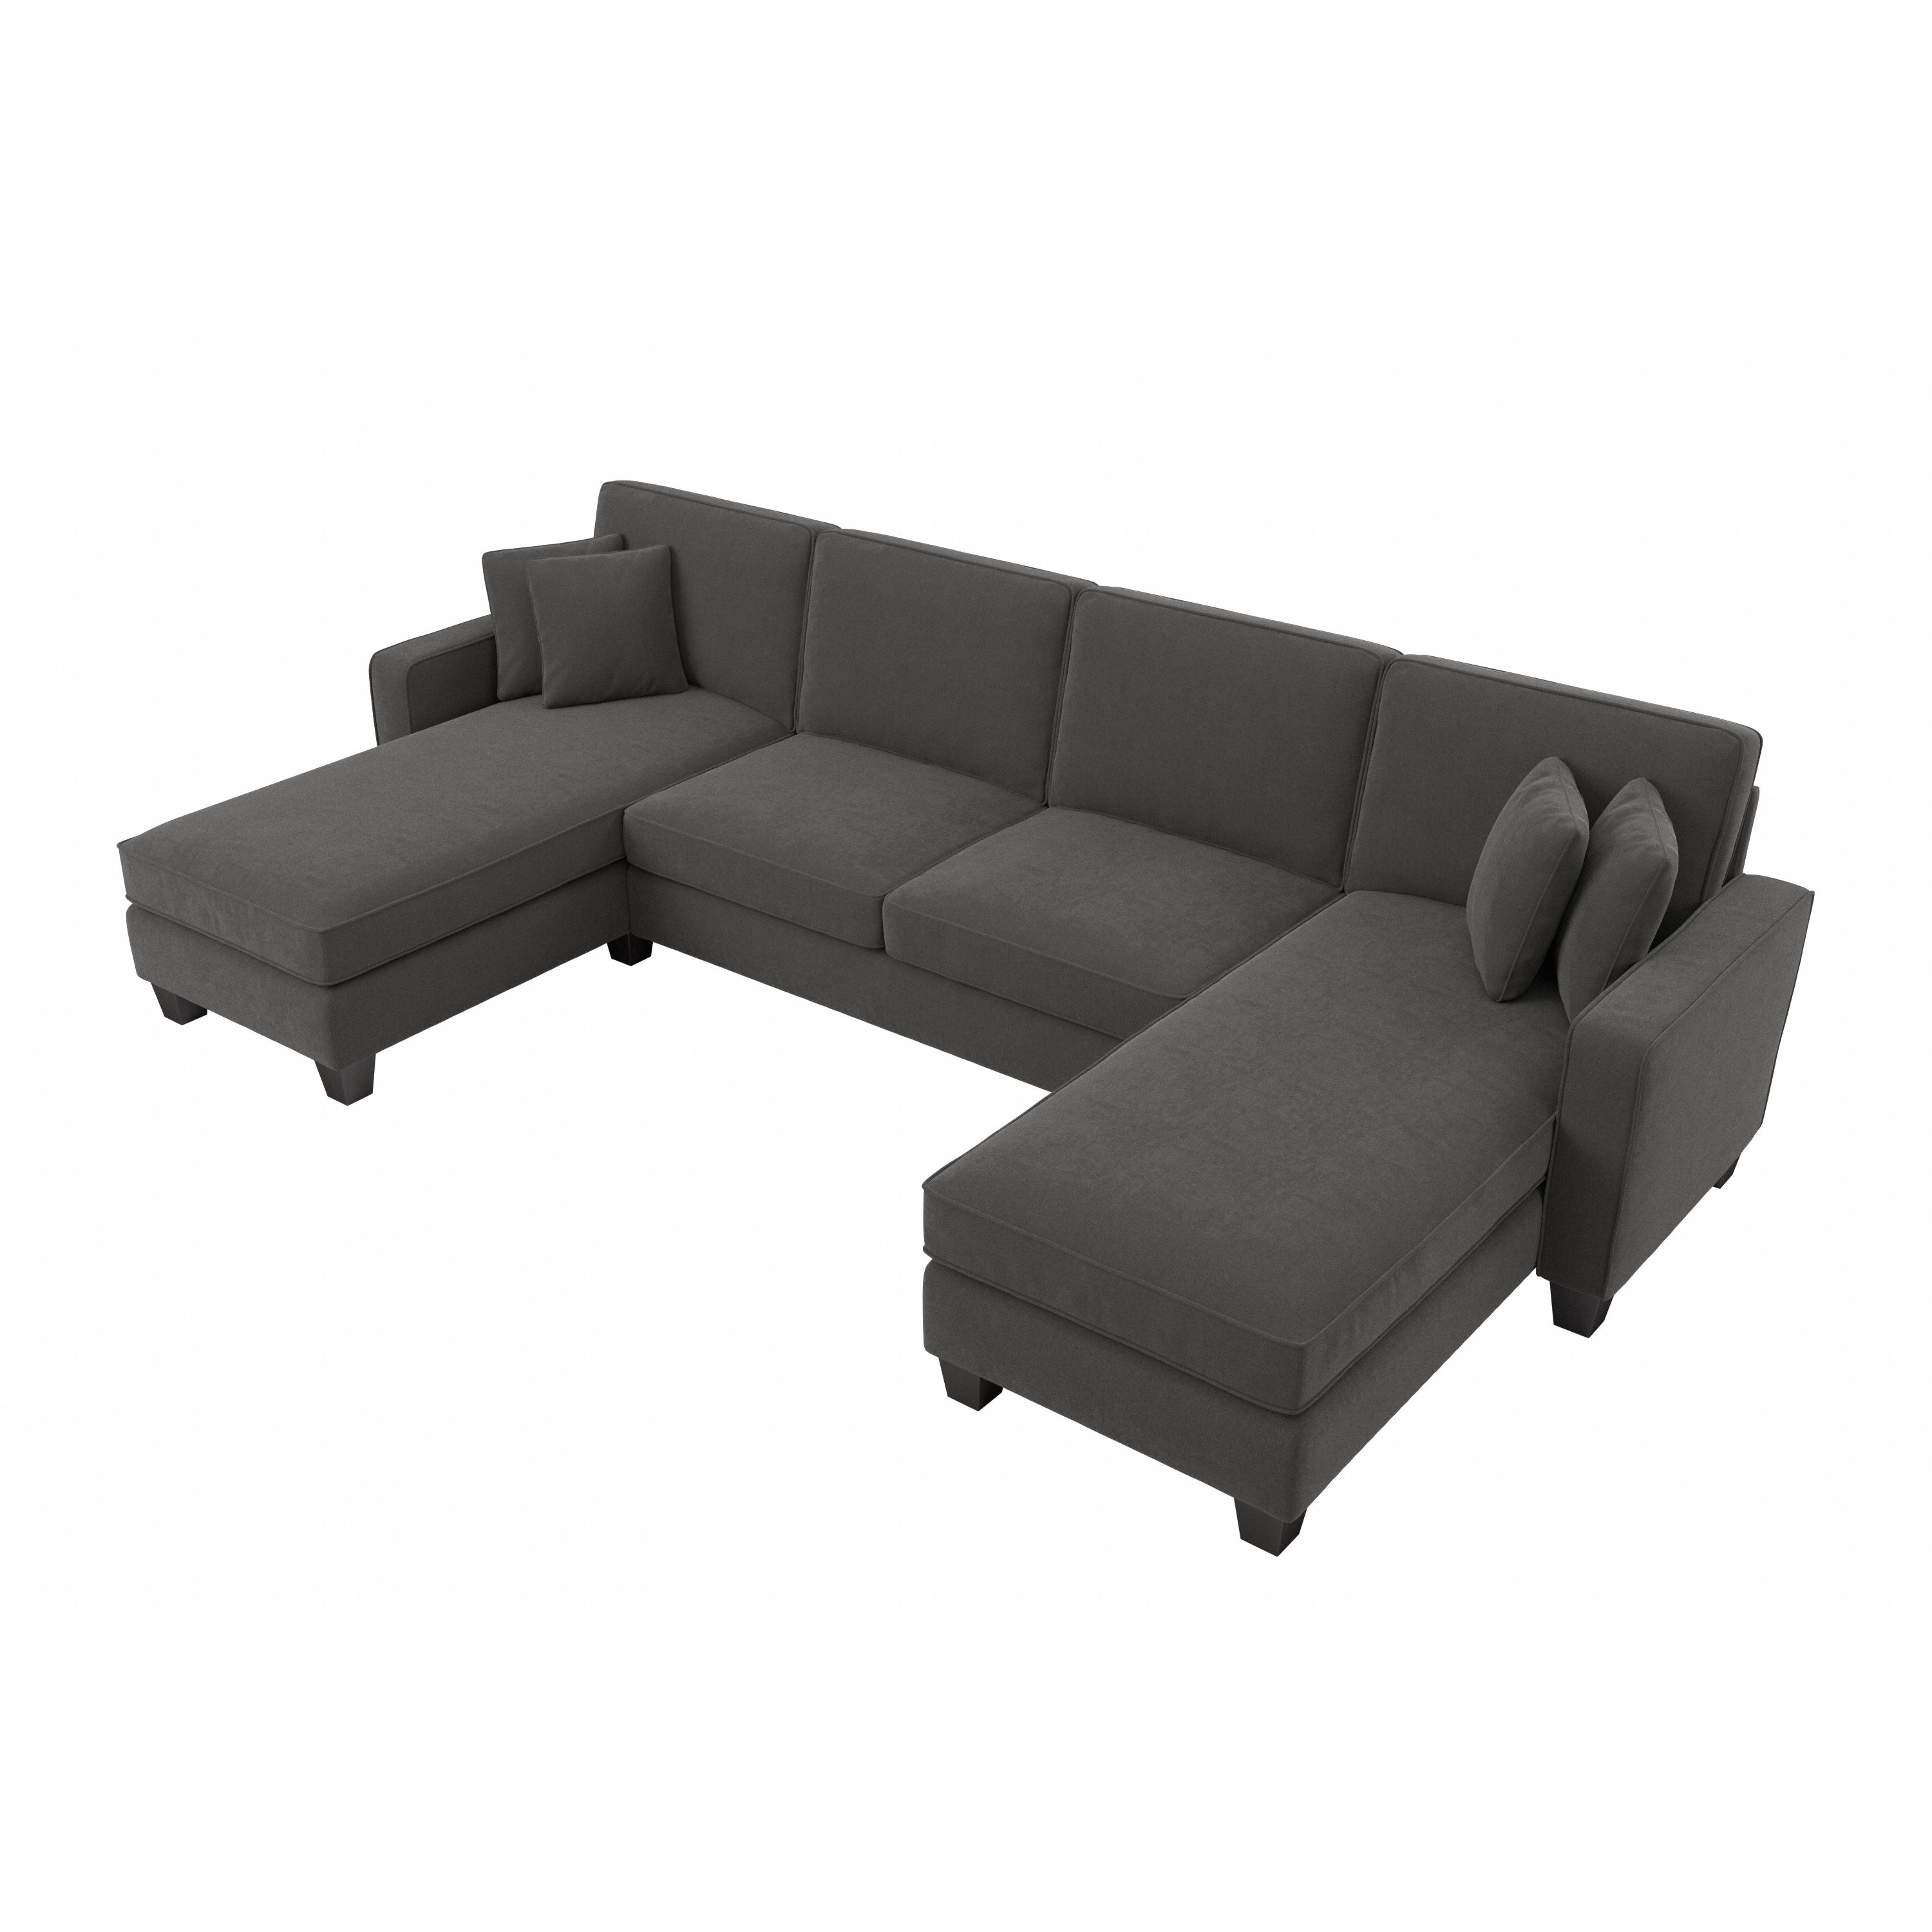 Shop Bush Furniture Stockton 131W Sectional Couch with Double Chaise Lounge 02 SNY130SCGH-03K #color_charcoal gray herringbone fabr